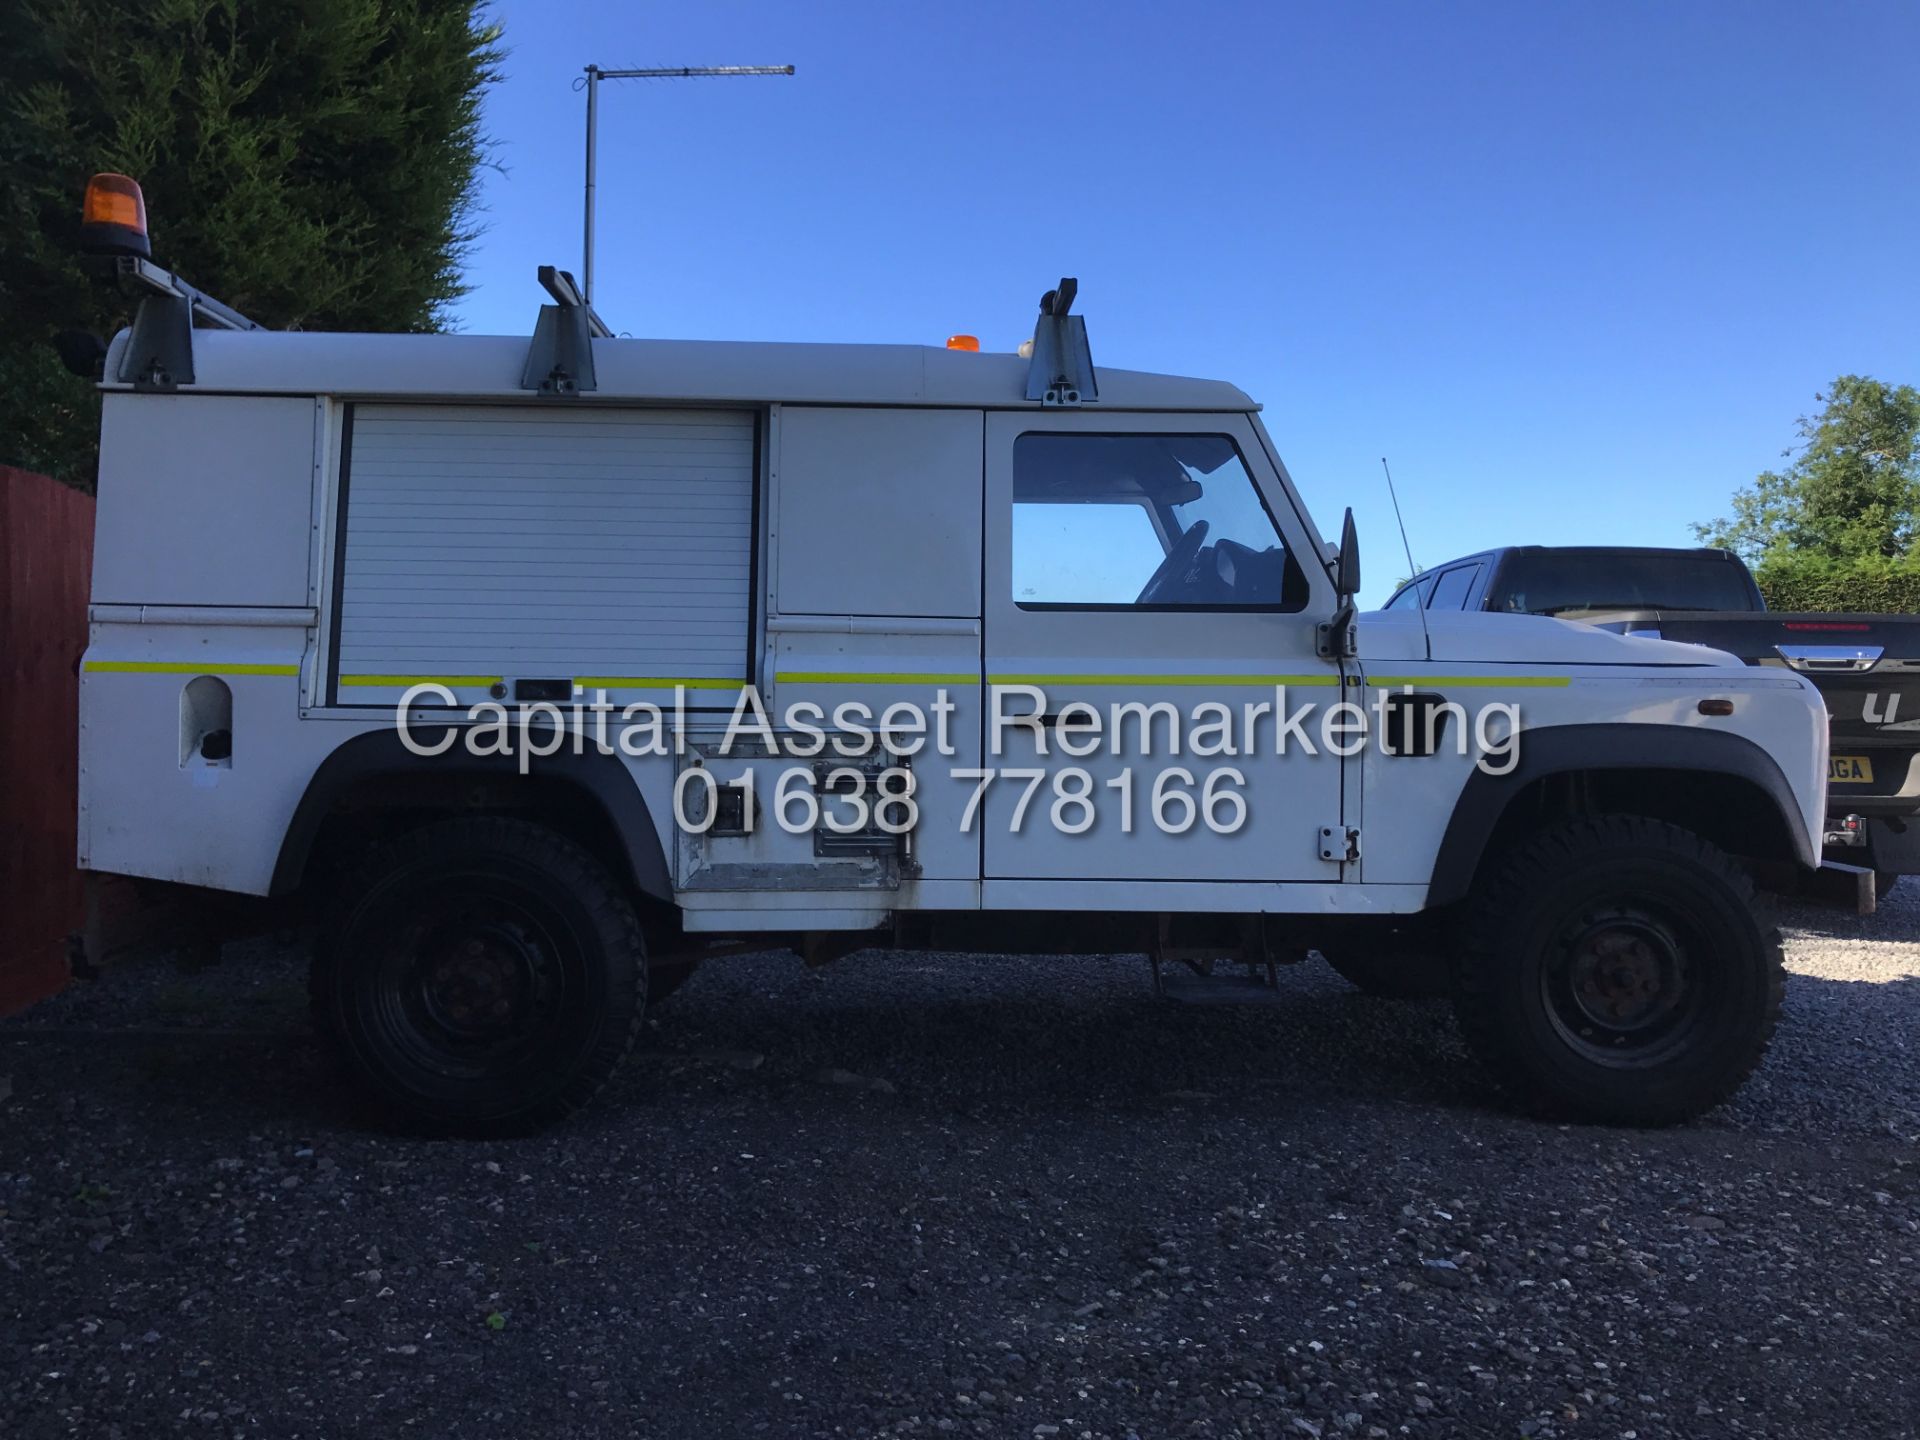 (ON SALE) LAND ROVER DEFENDER 2.4TDCI 110 HARD TOP (SPECIAL UTILITY VEHICLE) 6 SPEED (2010) 1 OWNER - Image 3 of 9